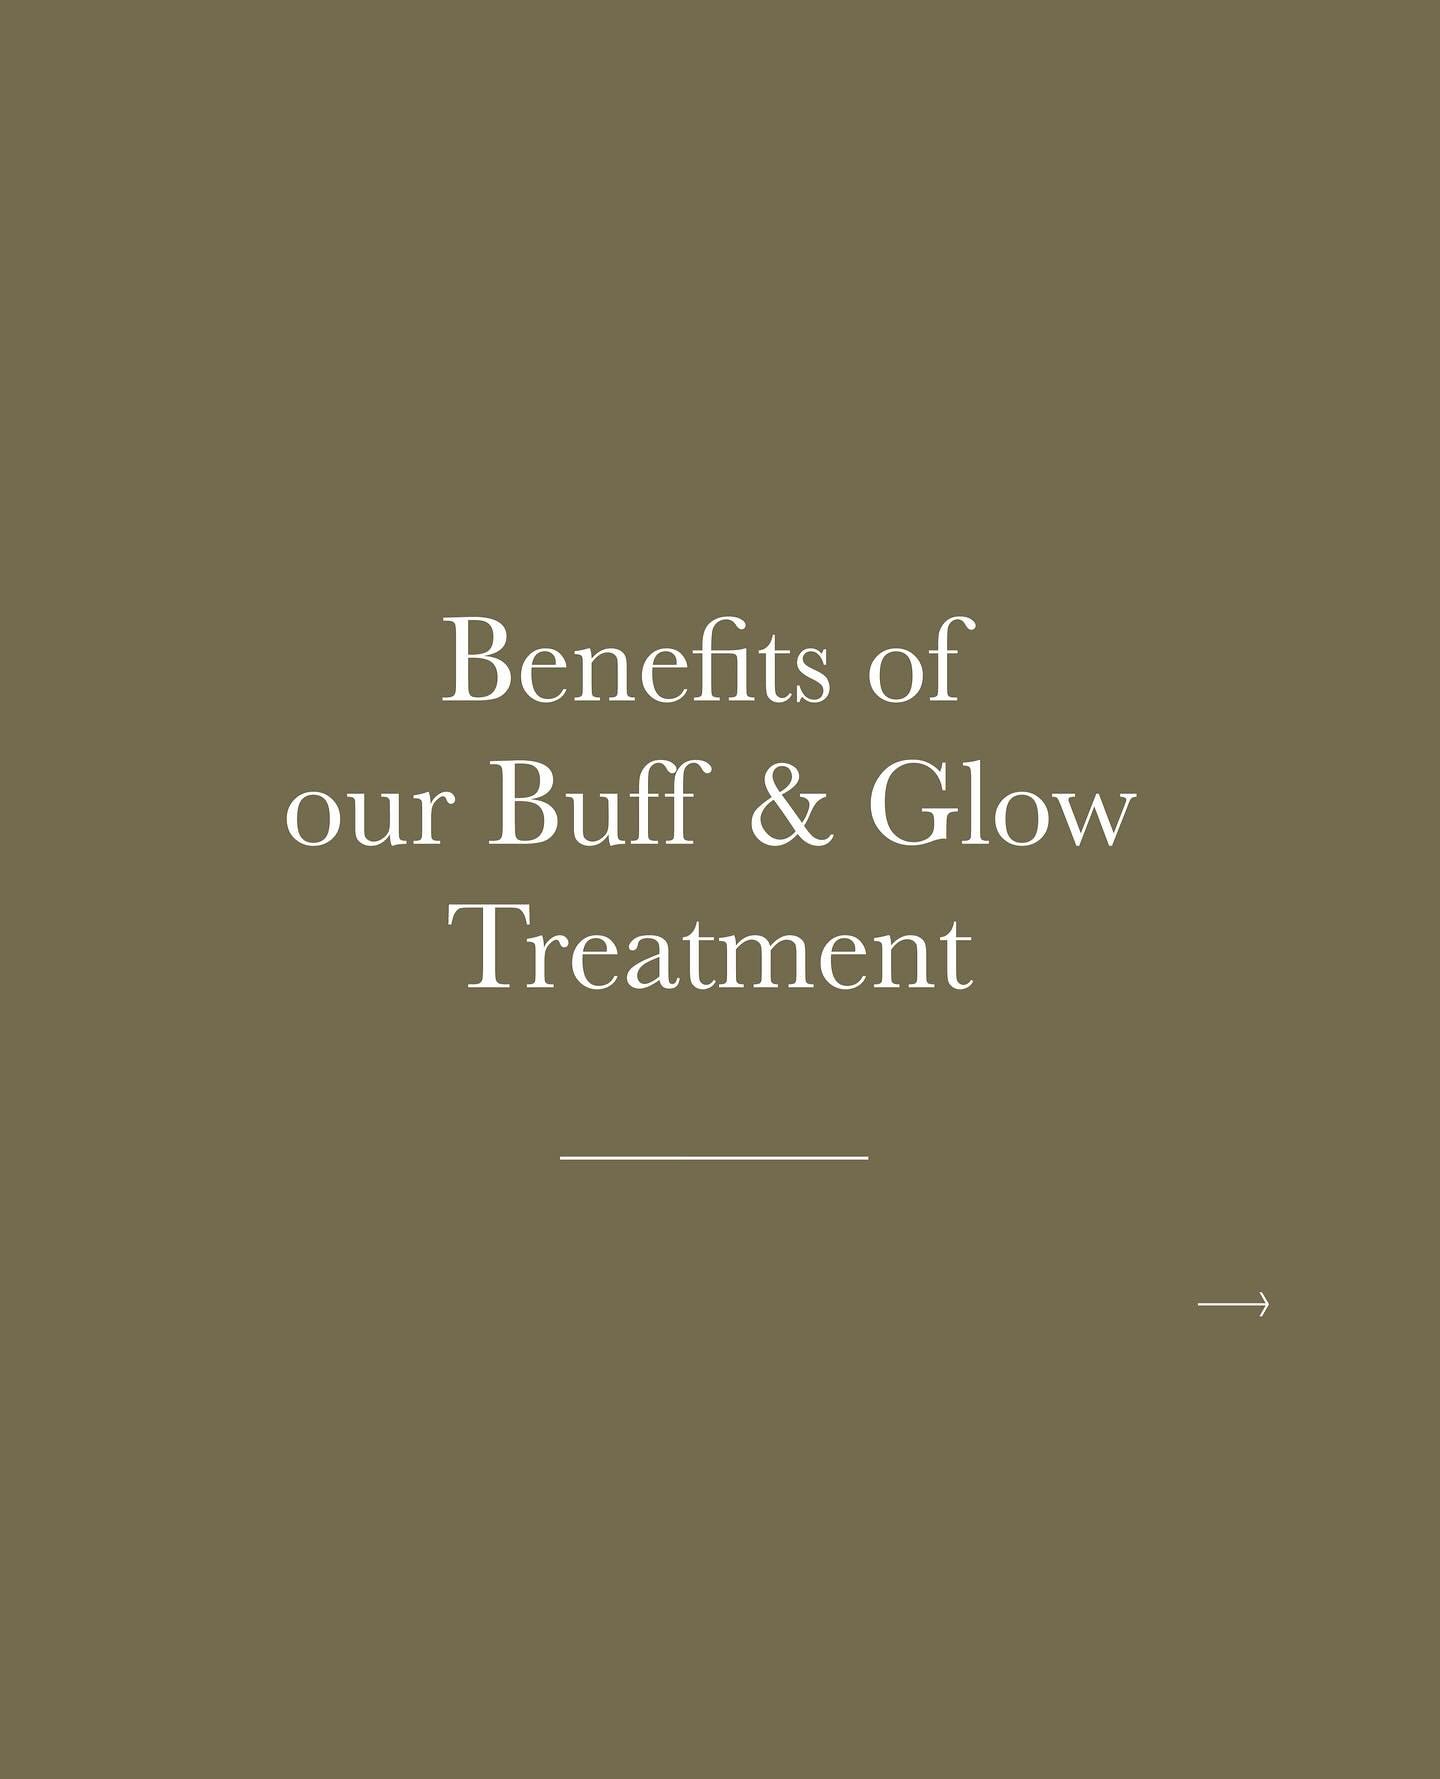 We have gotten a TON of questions about our Buff &amp; Glow service!

It includes an initial buffing stage, which focuses on exfoliation and prepares the skin for the application of the body butter. This nourishes the skin, locking in moisture, and e